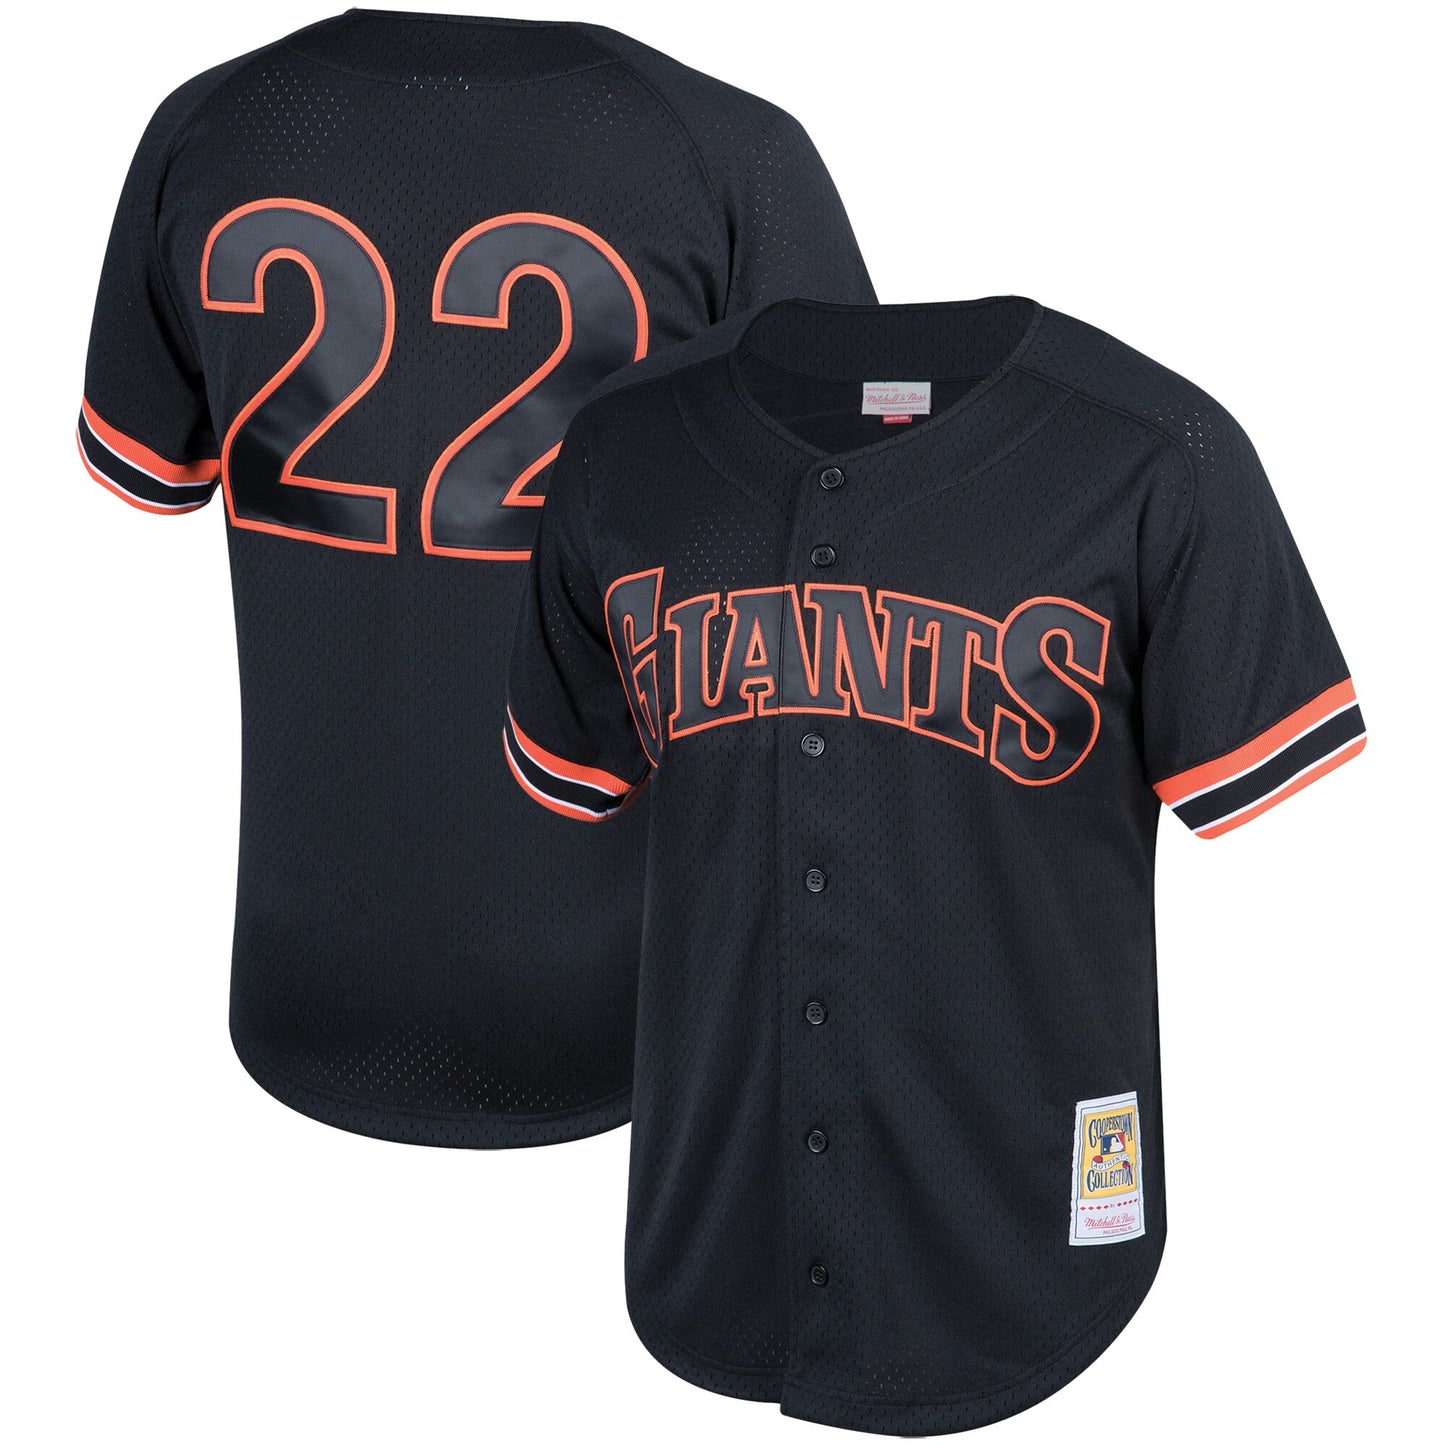 Will Clark San Francisco Giants Mitchell & Ness Cooperstown Collection Mesh Batting Practice Button-Up Jersey - Black